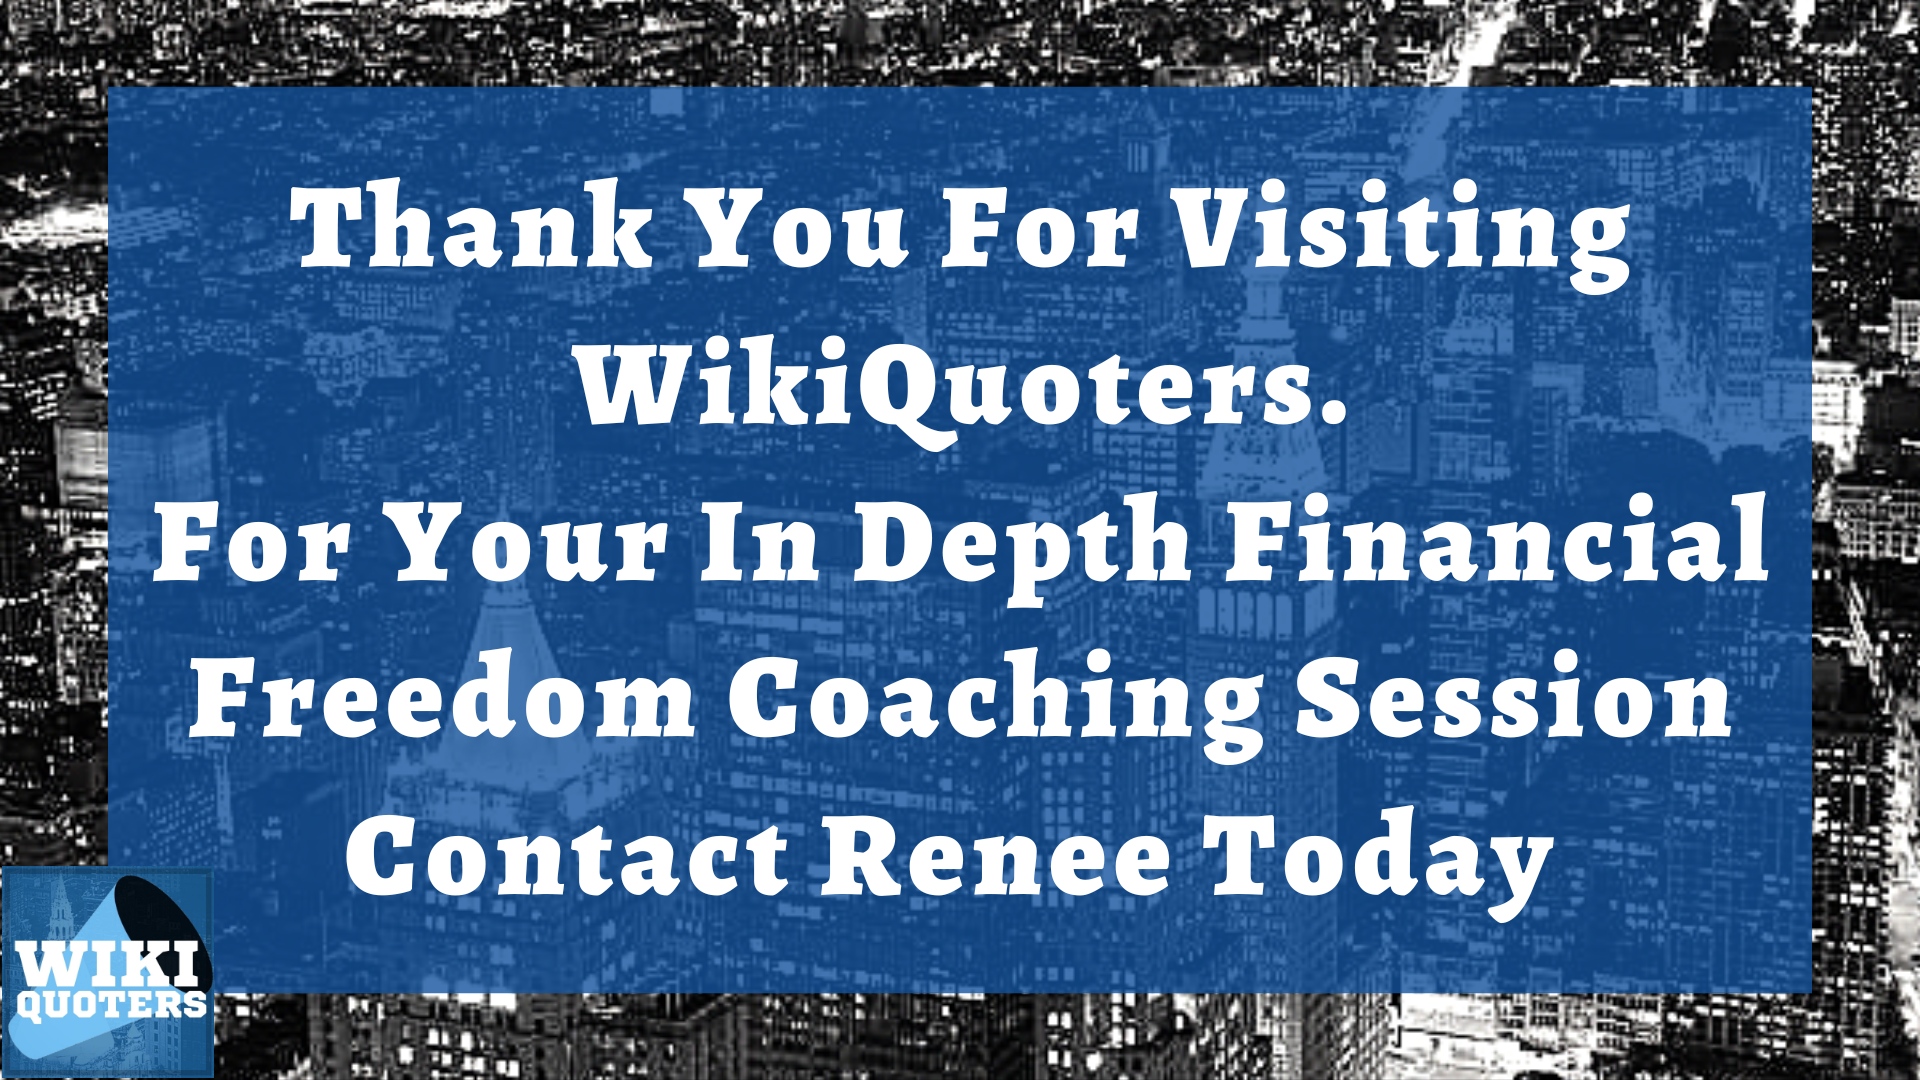 wikiquoters, financial coaching, insurance help, policy review, be your own bank, alternative bank